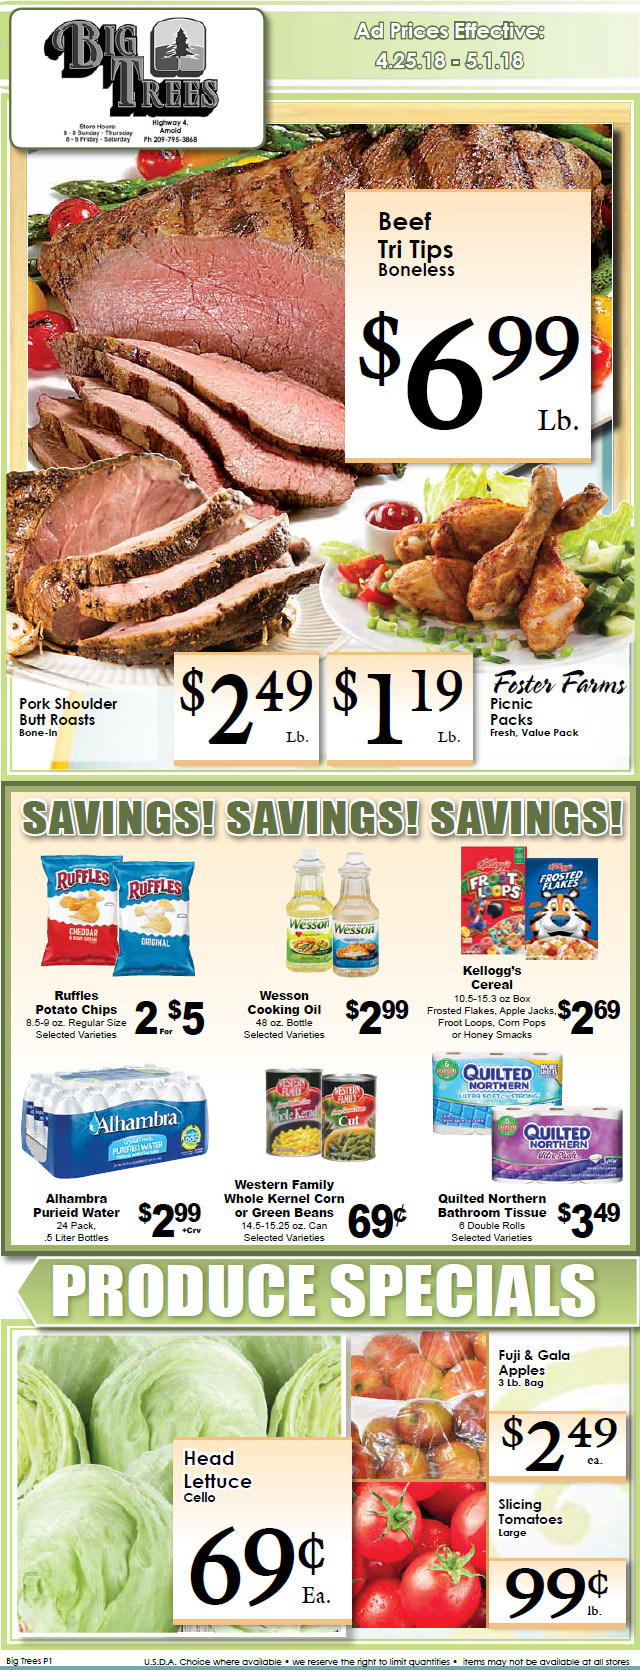 Big Trees Market Weekly Ad & Grocery Specials Through May 1